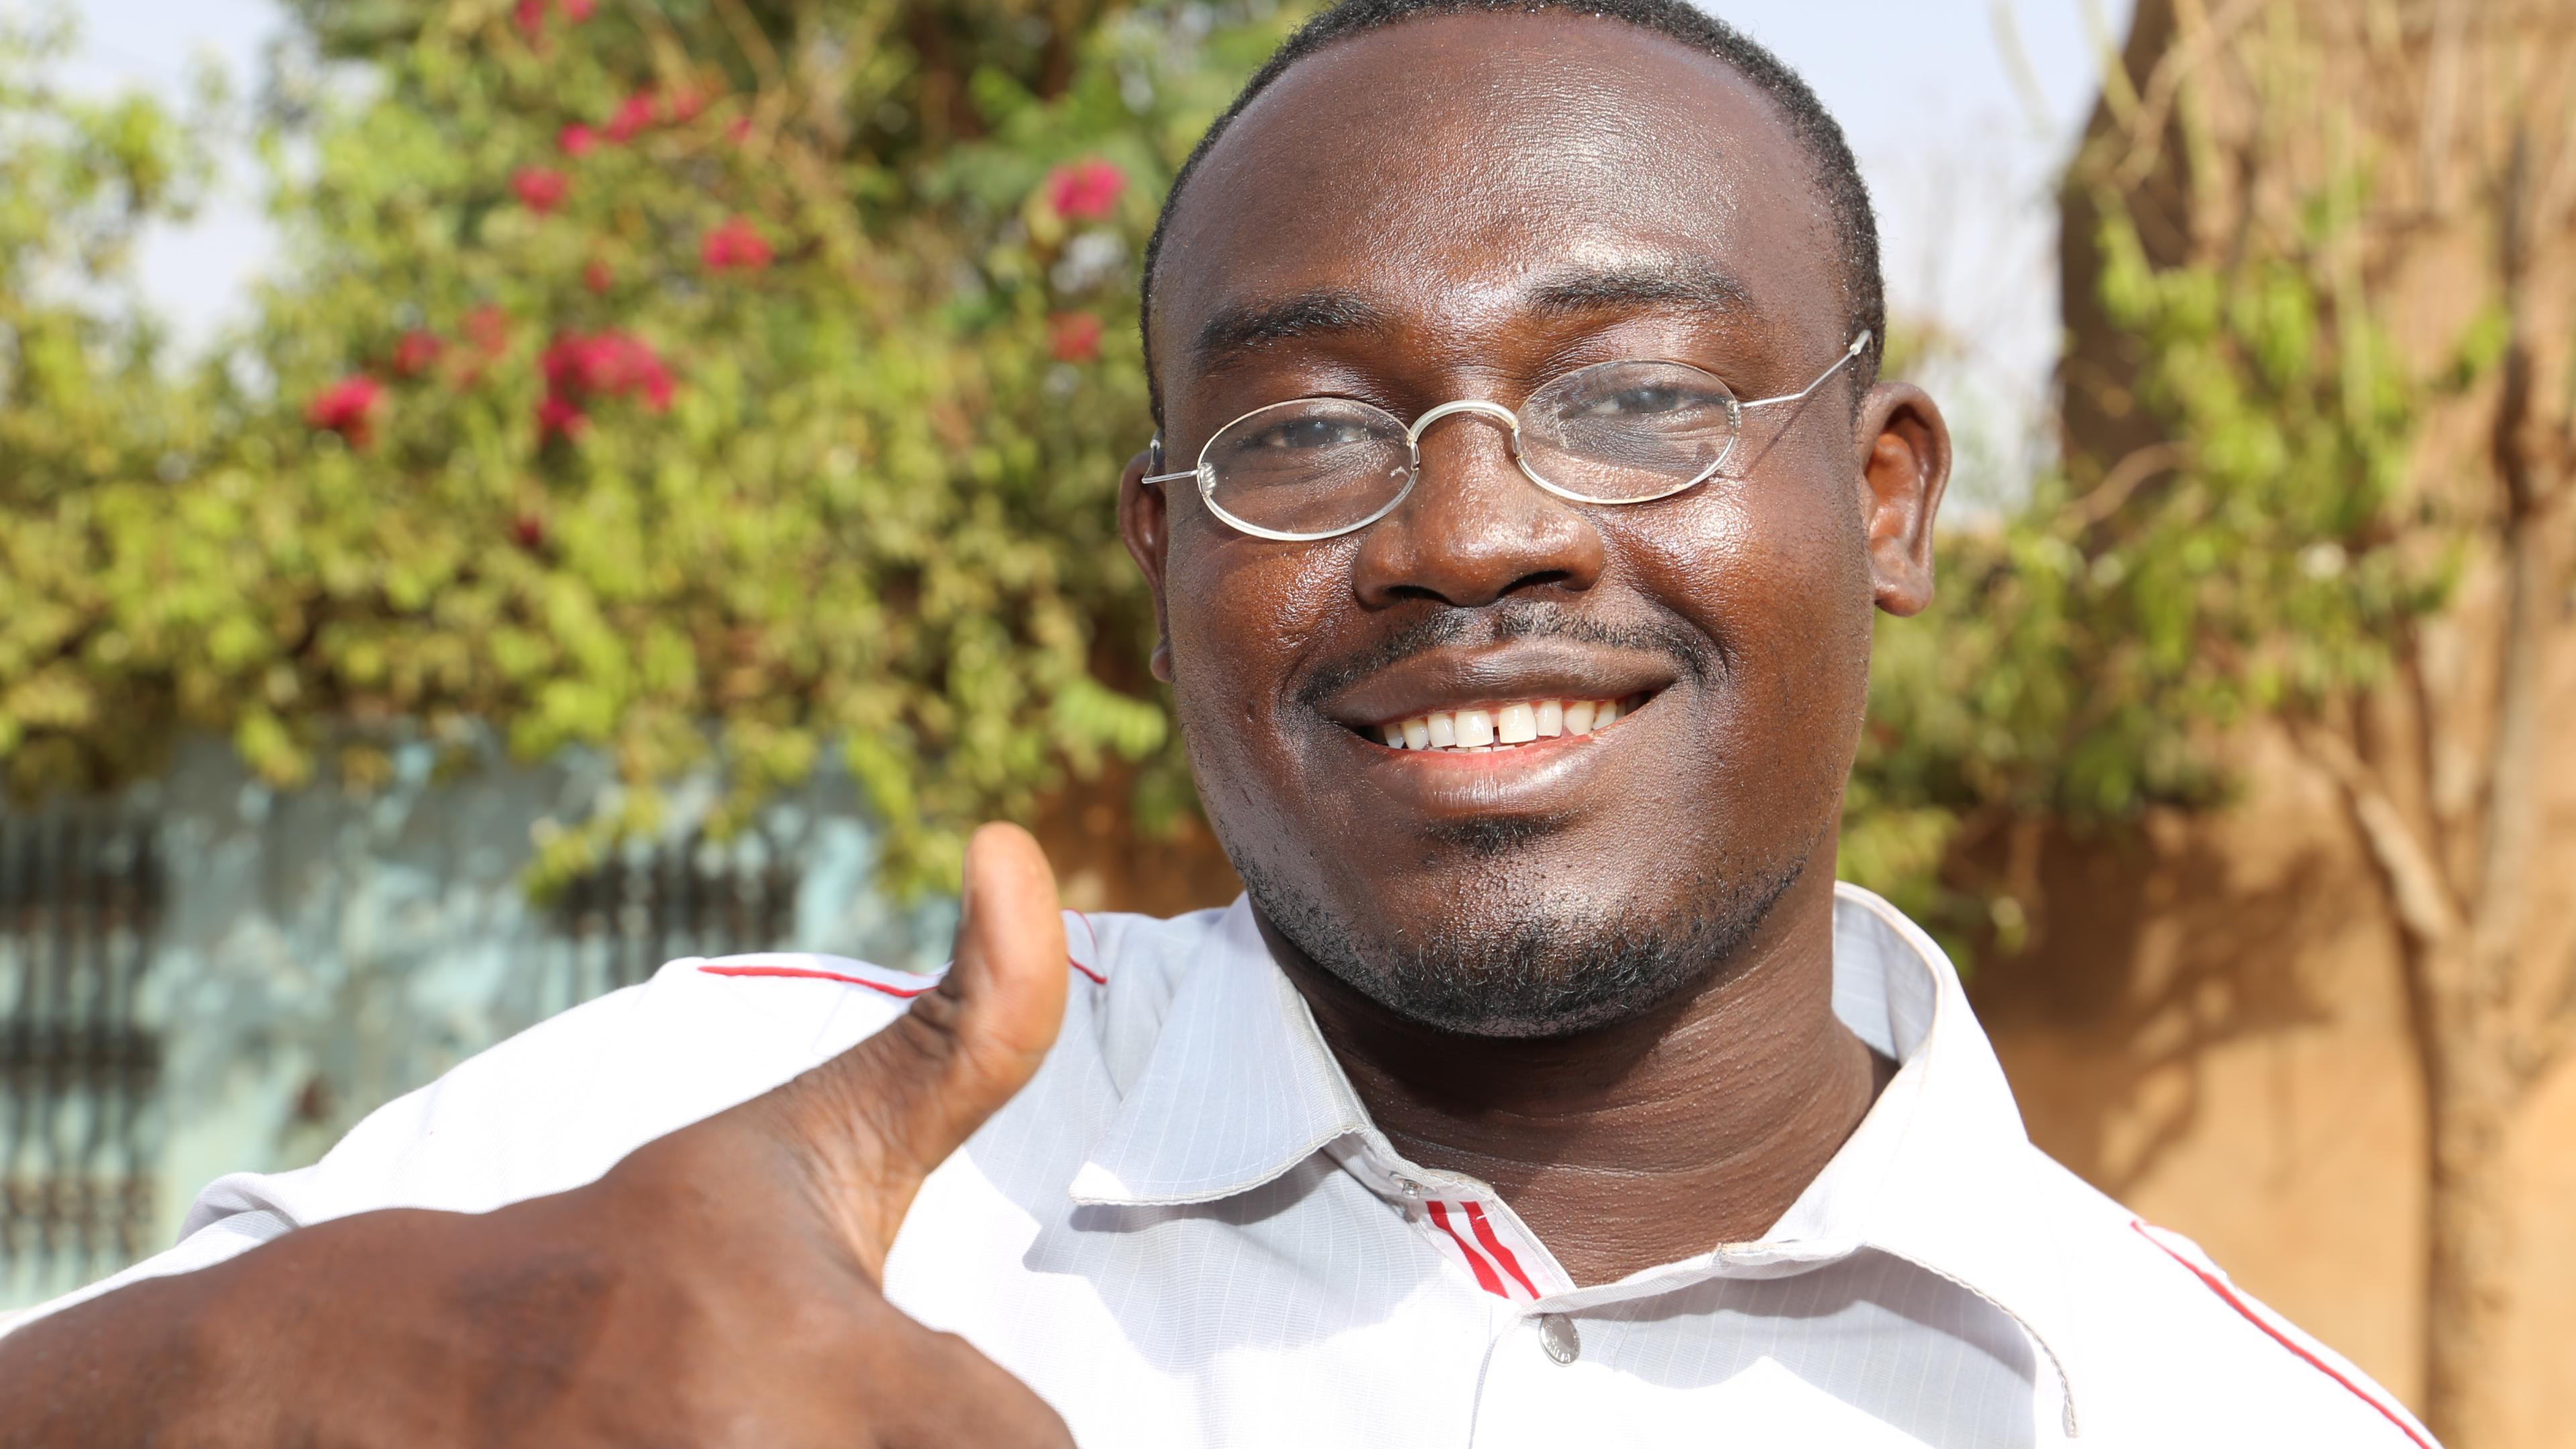 Man from Burkina Faso, wearing OneDollarGlasses, holding his thumbs up